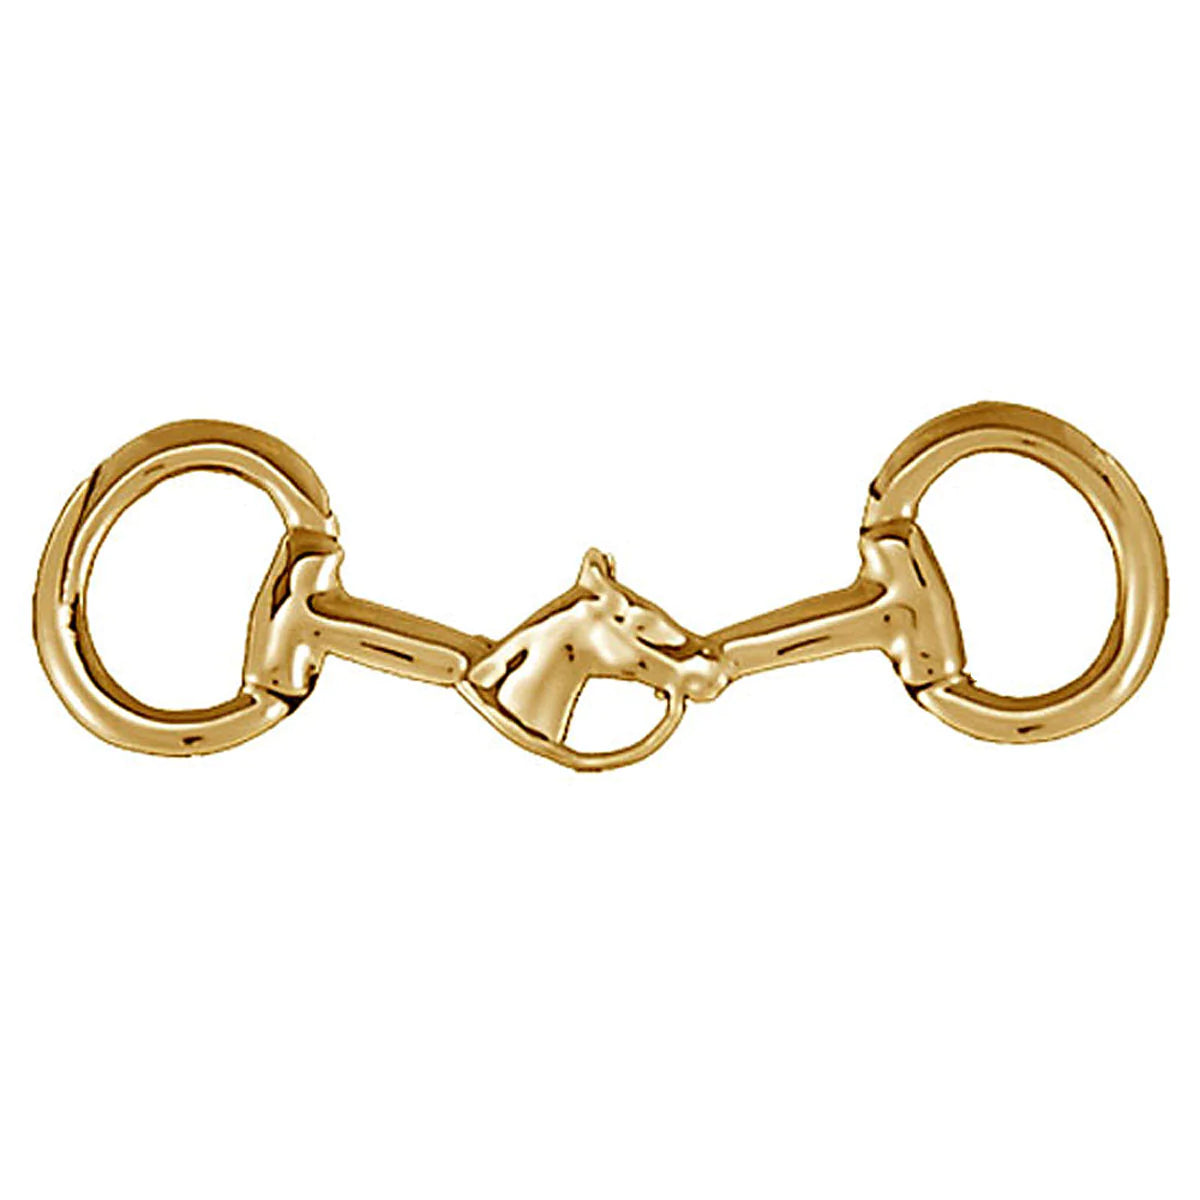 EXSELLE SNAFFLE BIT WITH HORSE HEAD STOCK PIN